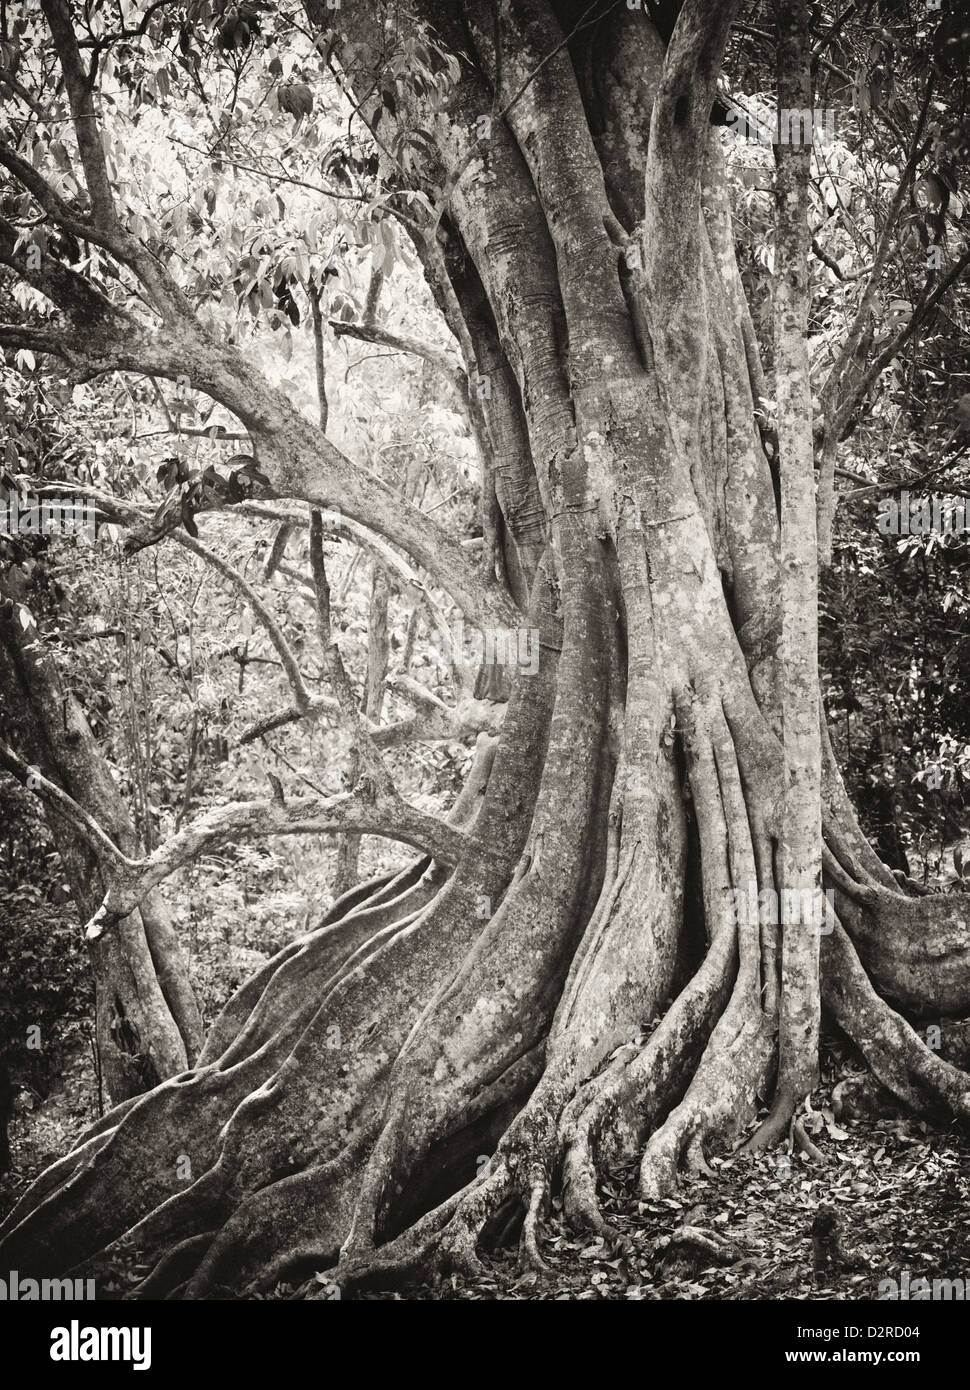 The root system of a Bengal fig tree in the at Periyar in Kerala. Black and white conversion Stock Alamy